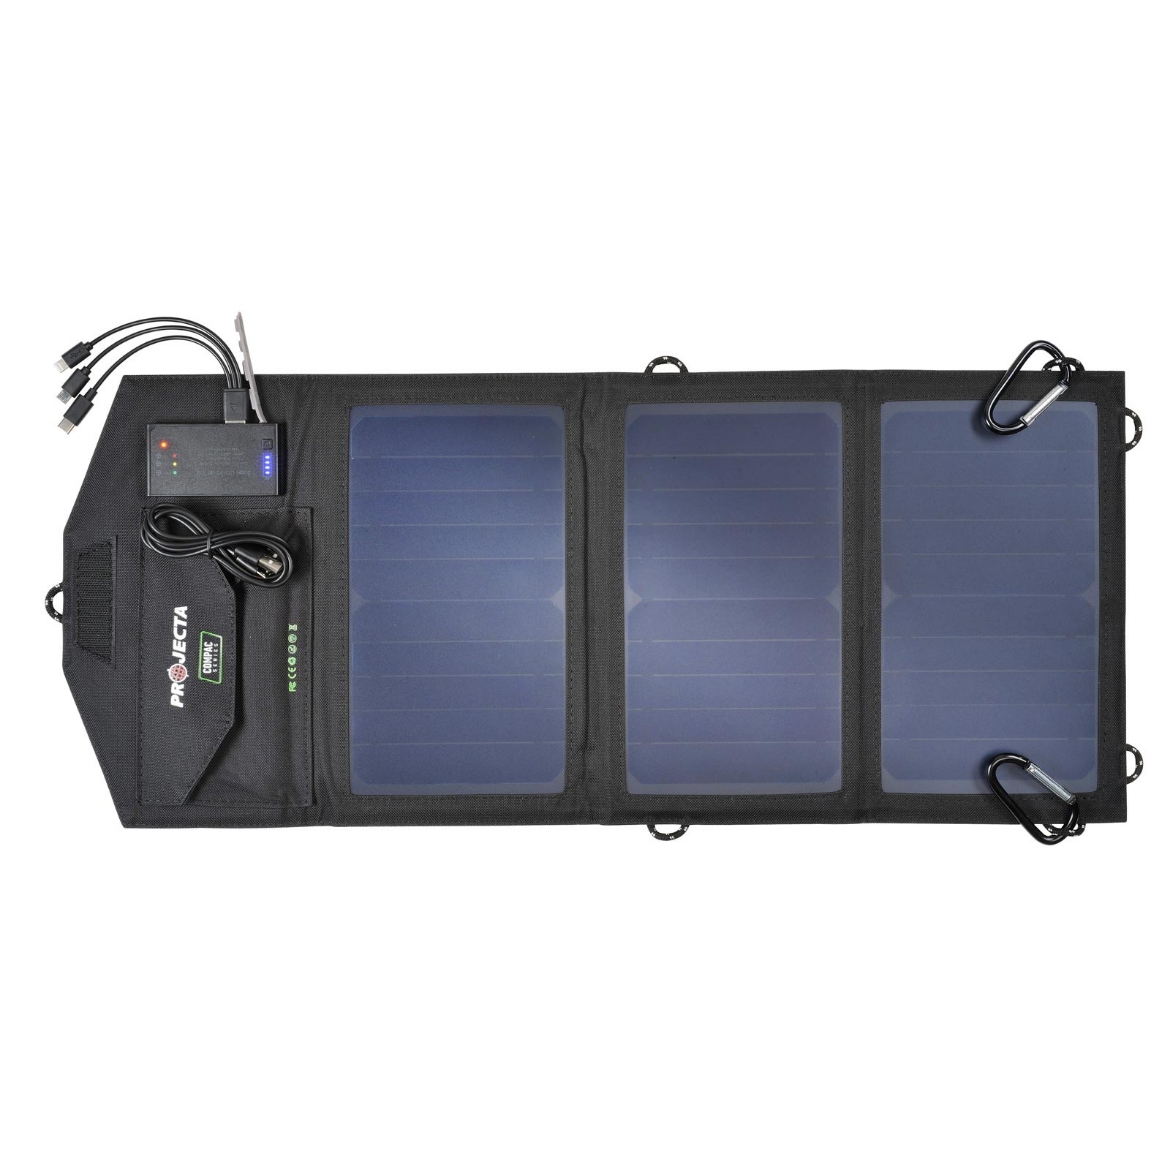 Picture of PROJECTA 15W PERSONAL FOLDING SOLAR PANEL WITH POWER BANK